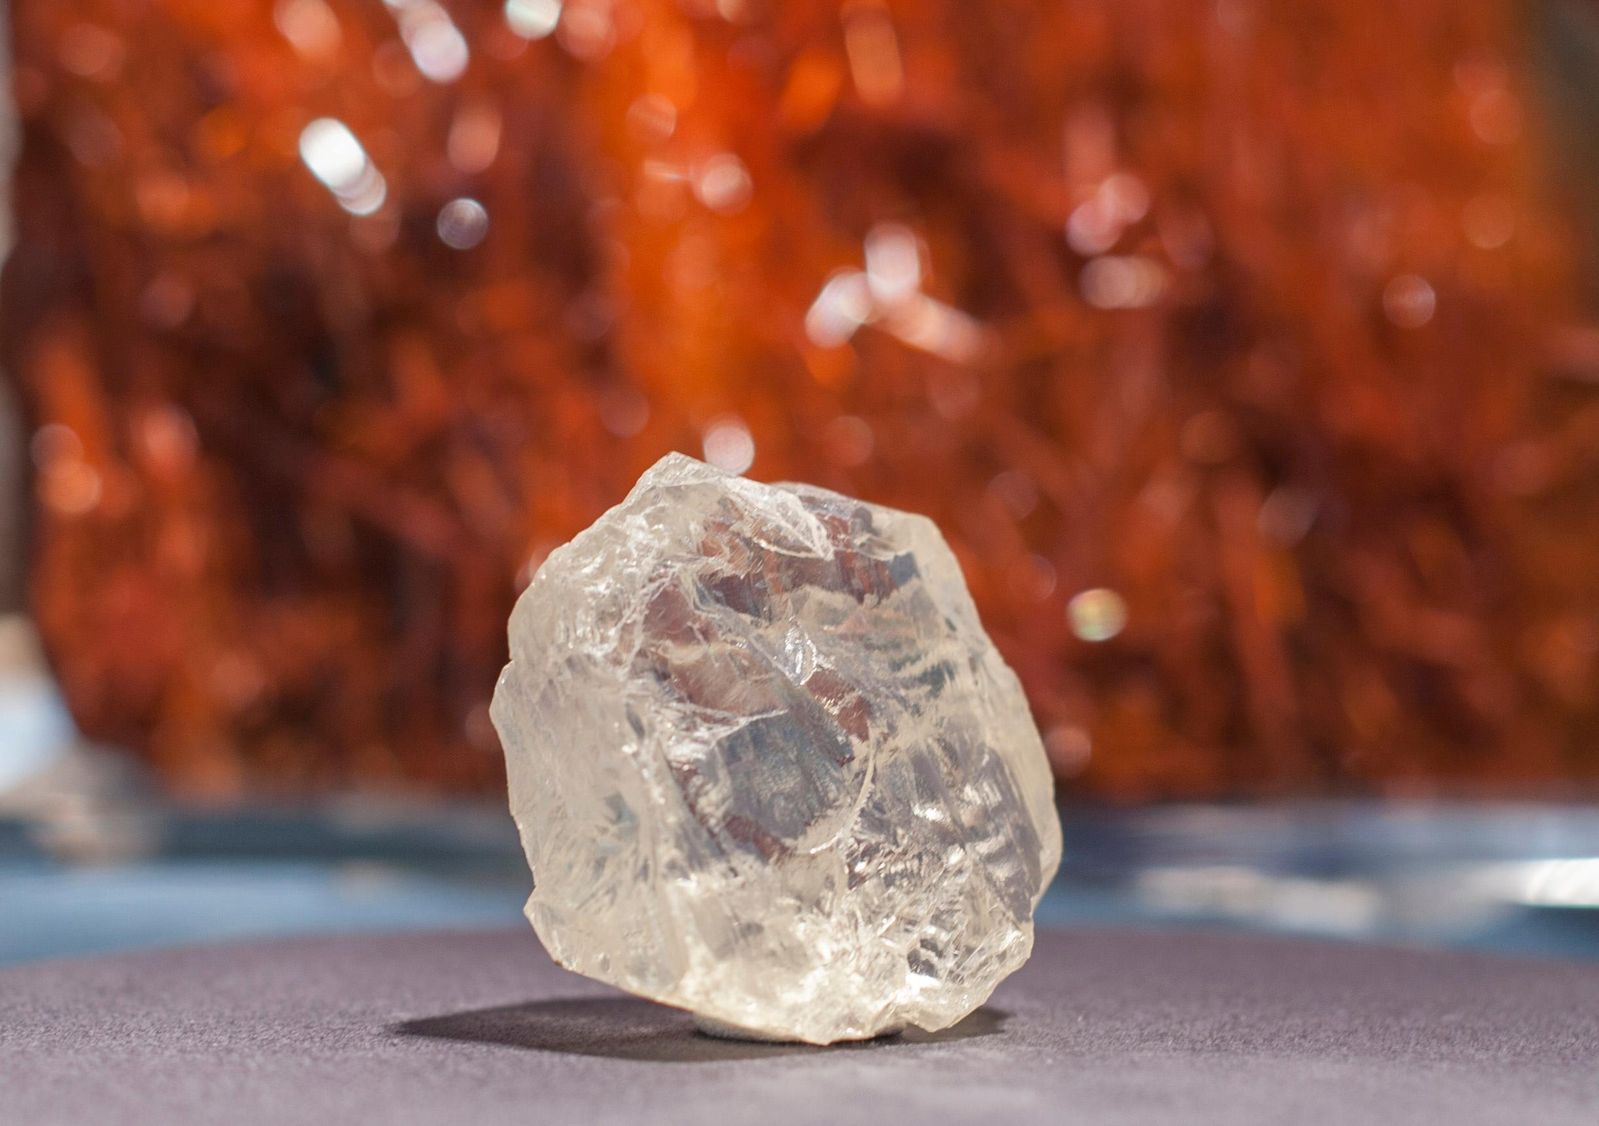 discovered large rough diamond